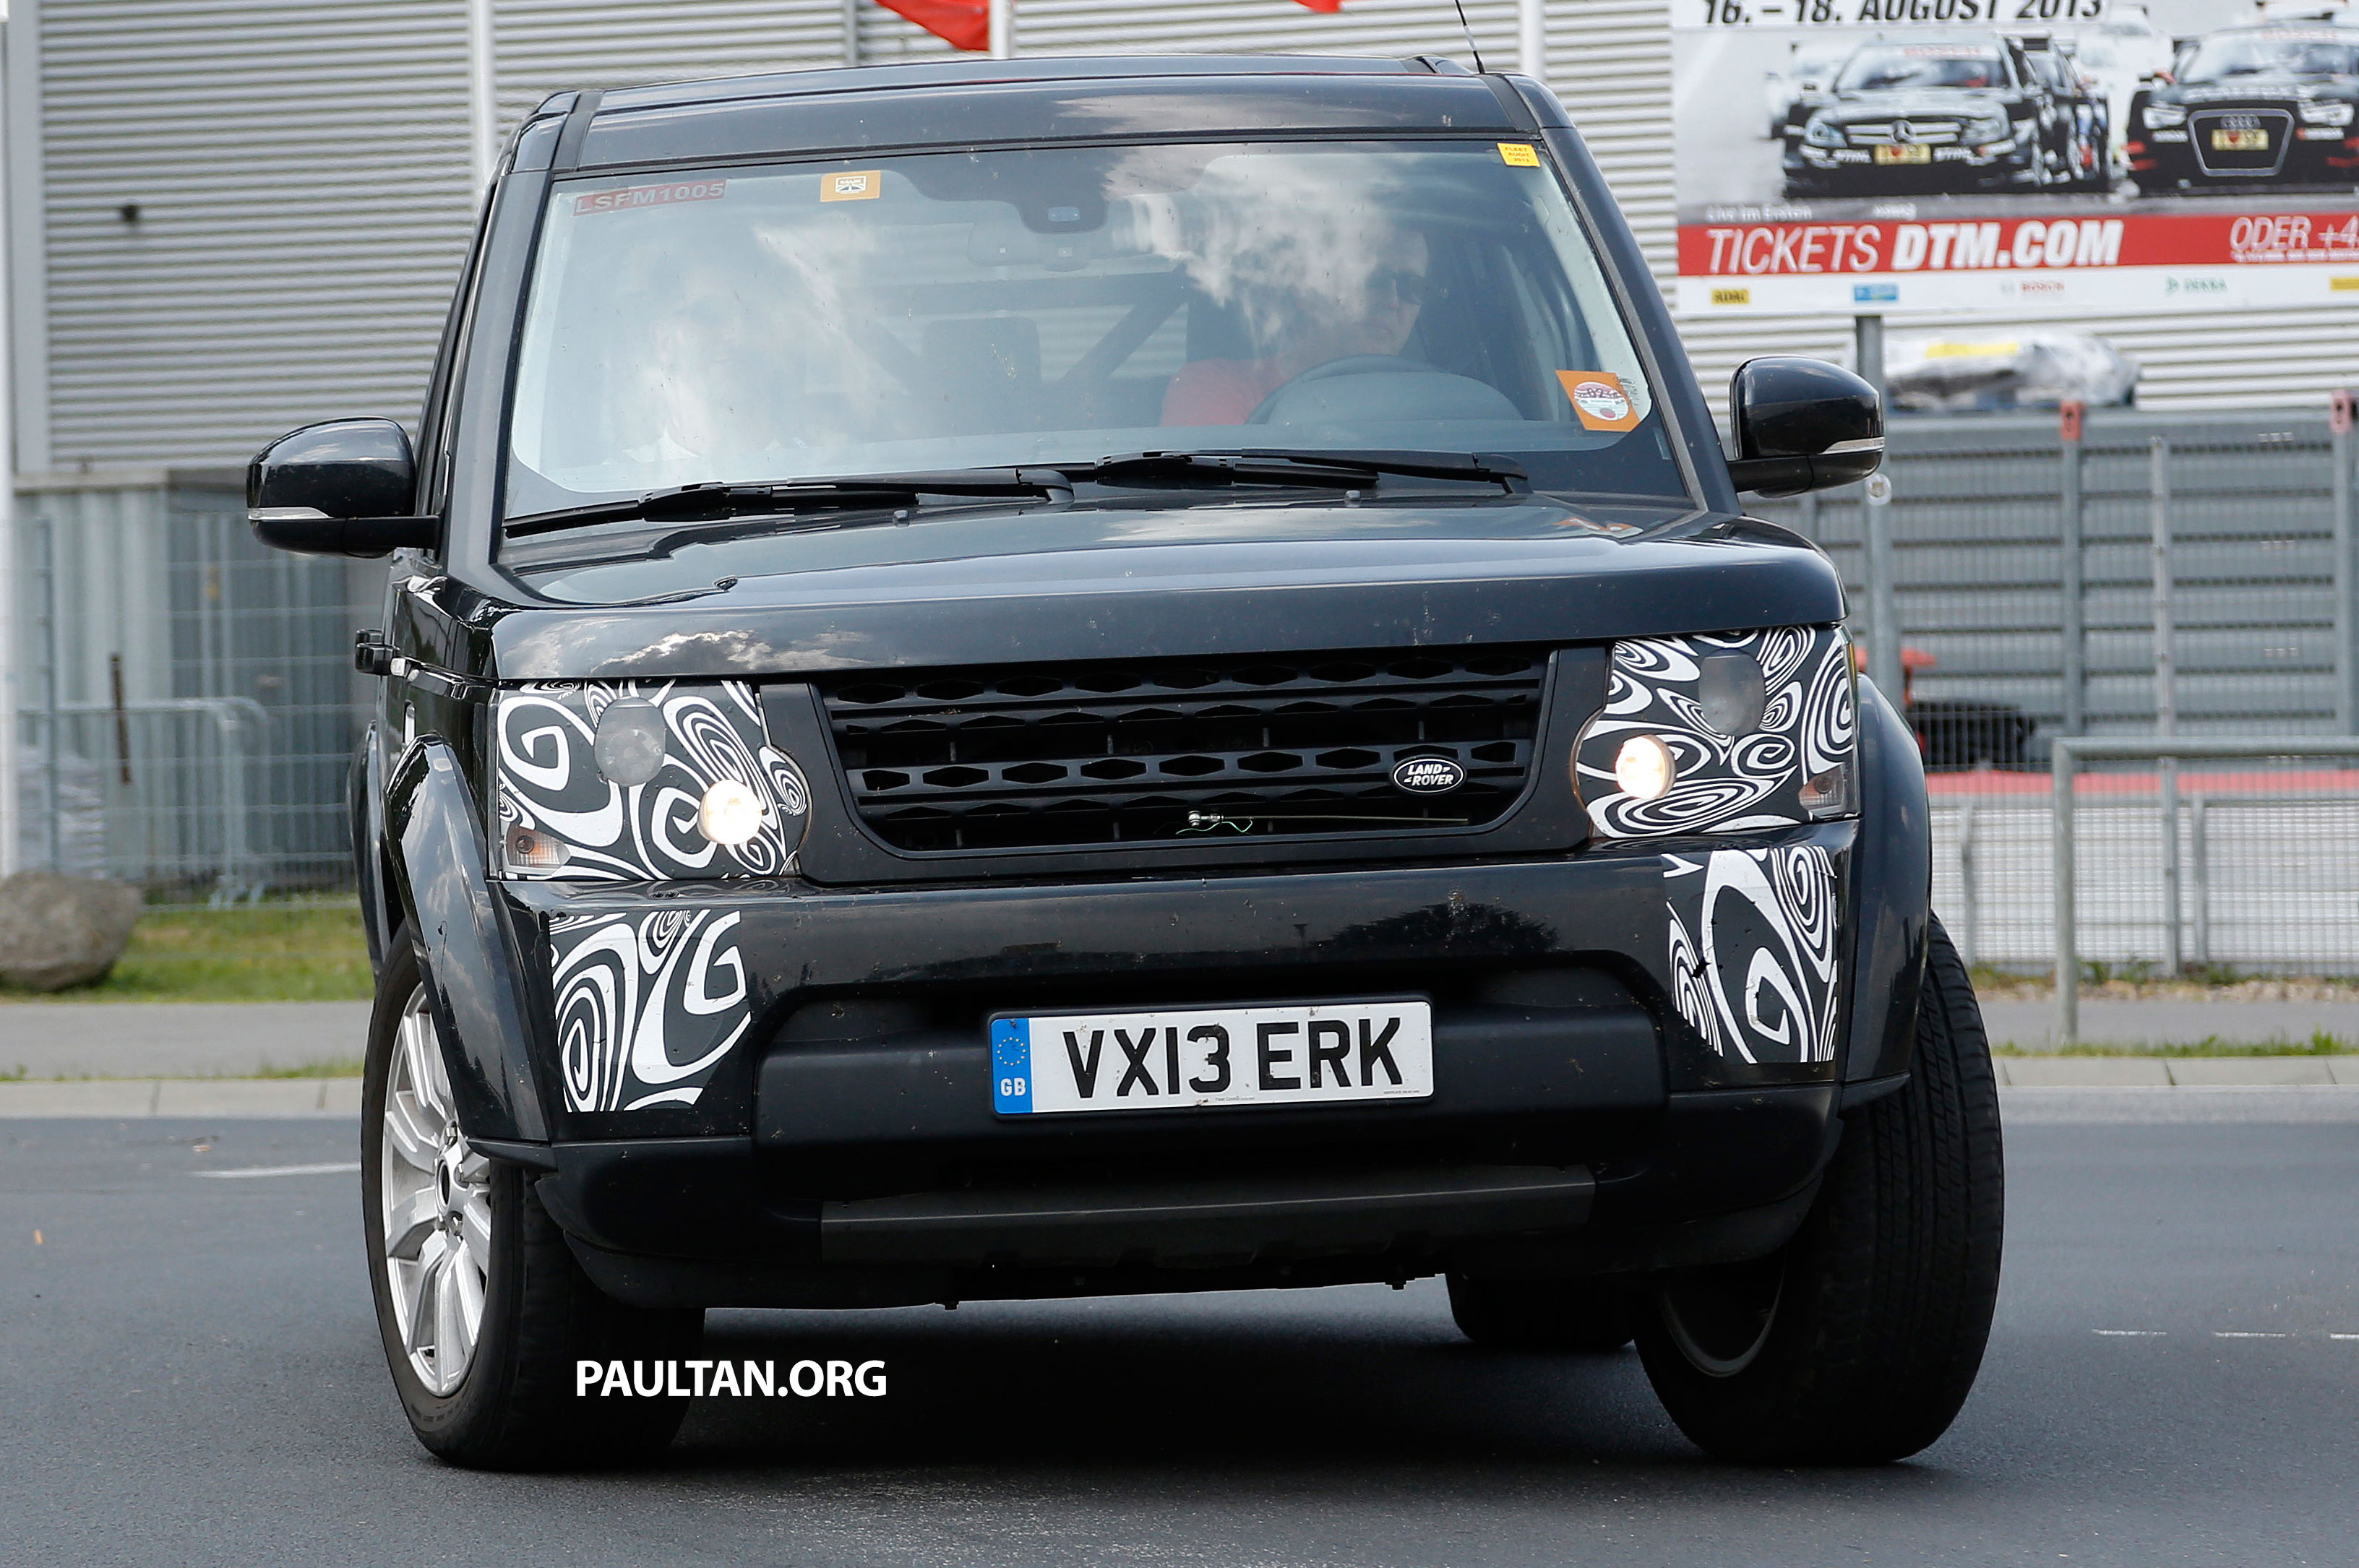 SPYSHOTS: Land Rover Discovery 4 facelift on test Land-Rover-Discovery ...